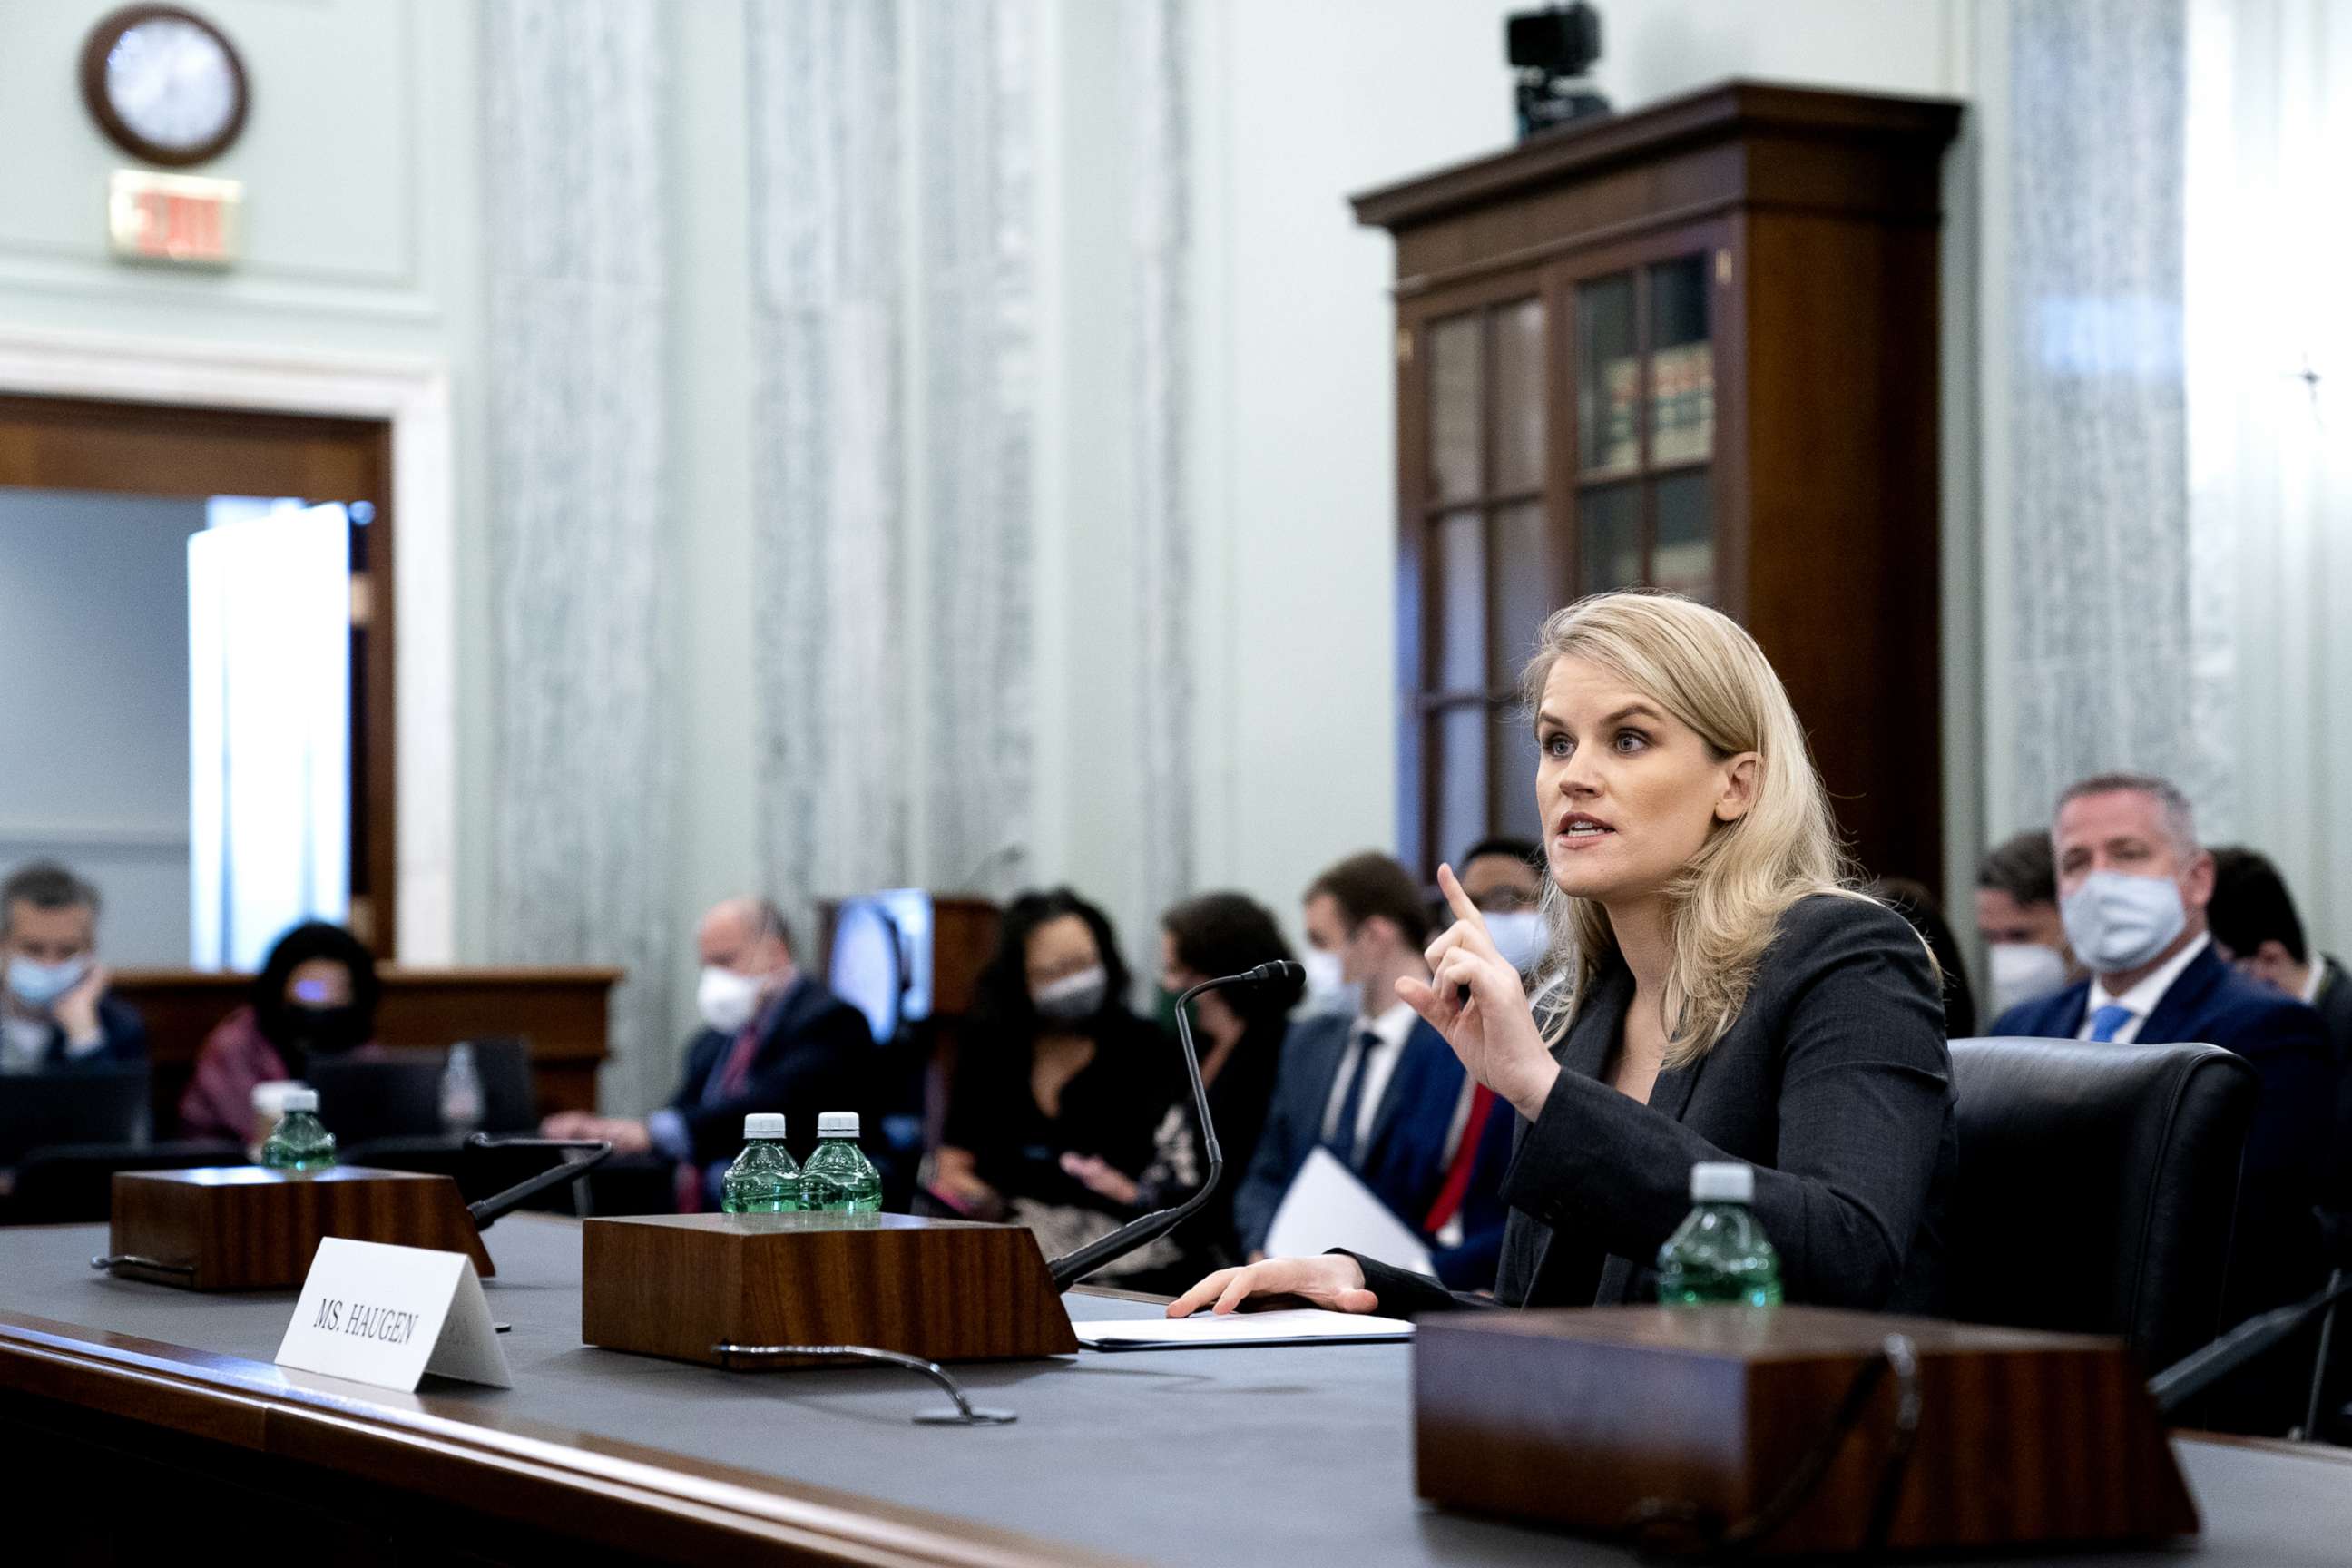 PHOTO: Frances Haugen, Facebook whistle-blower, speaks during a Senate Commerce, Science and Transportation Subcommittee hearing in Washington, D.C., Oct. 5, 2021.